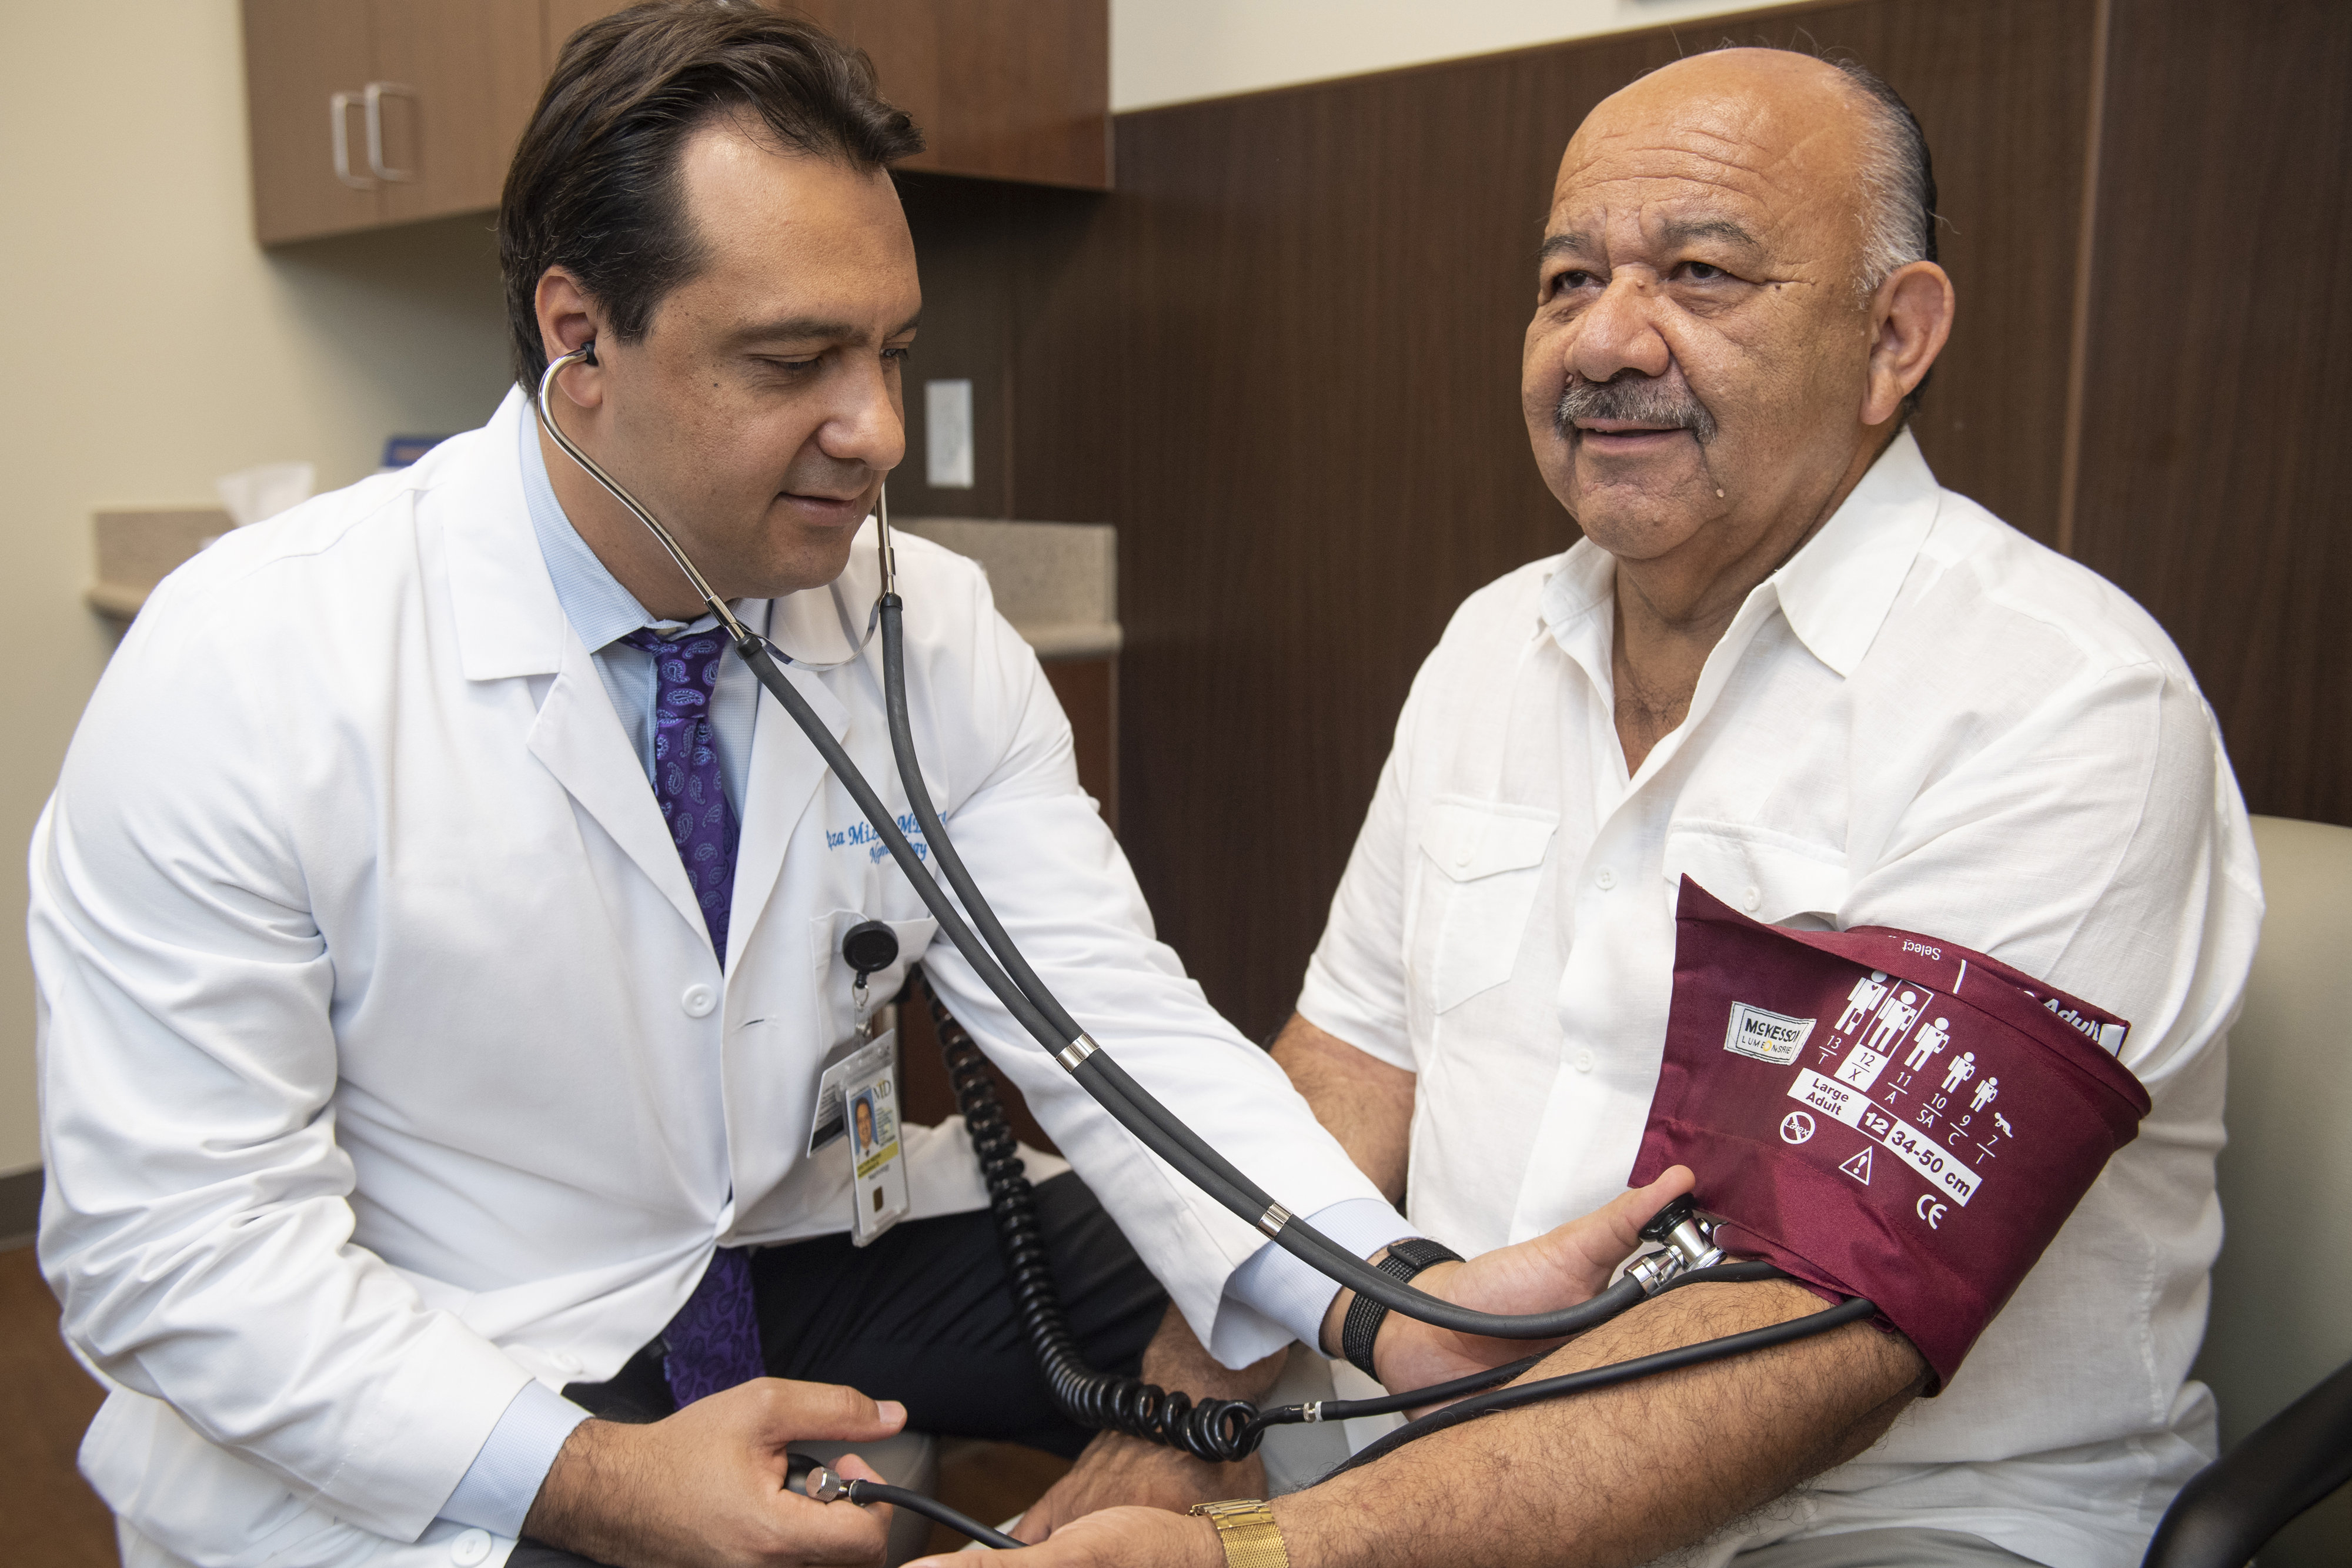 Male doctor checking a male patient's blood pressure with a cuff and stethoscope.